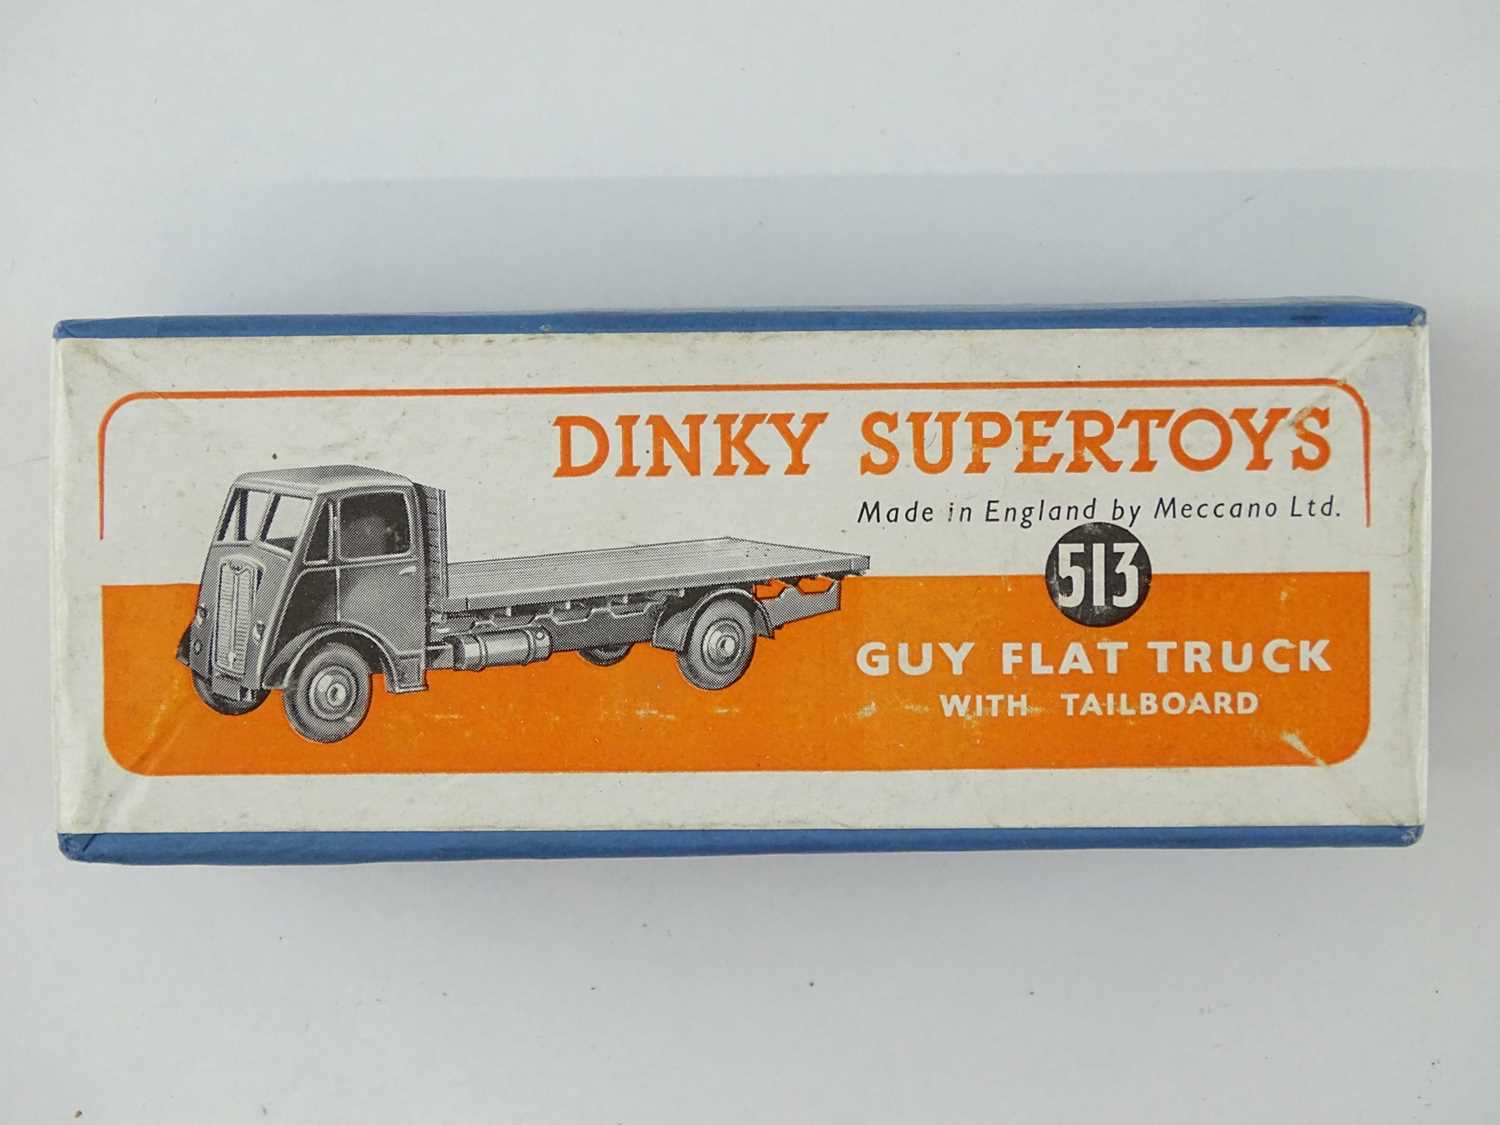 A DINKY Supertoys 513 Guy Flat Truck with Tailboard - dark green cab and chassis and mid-green - Image 5 of 5